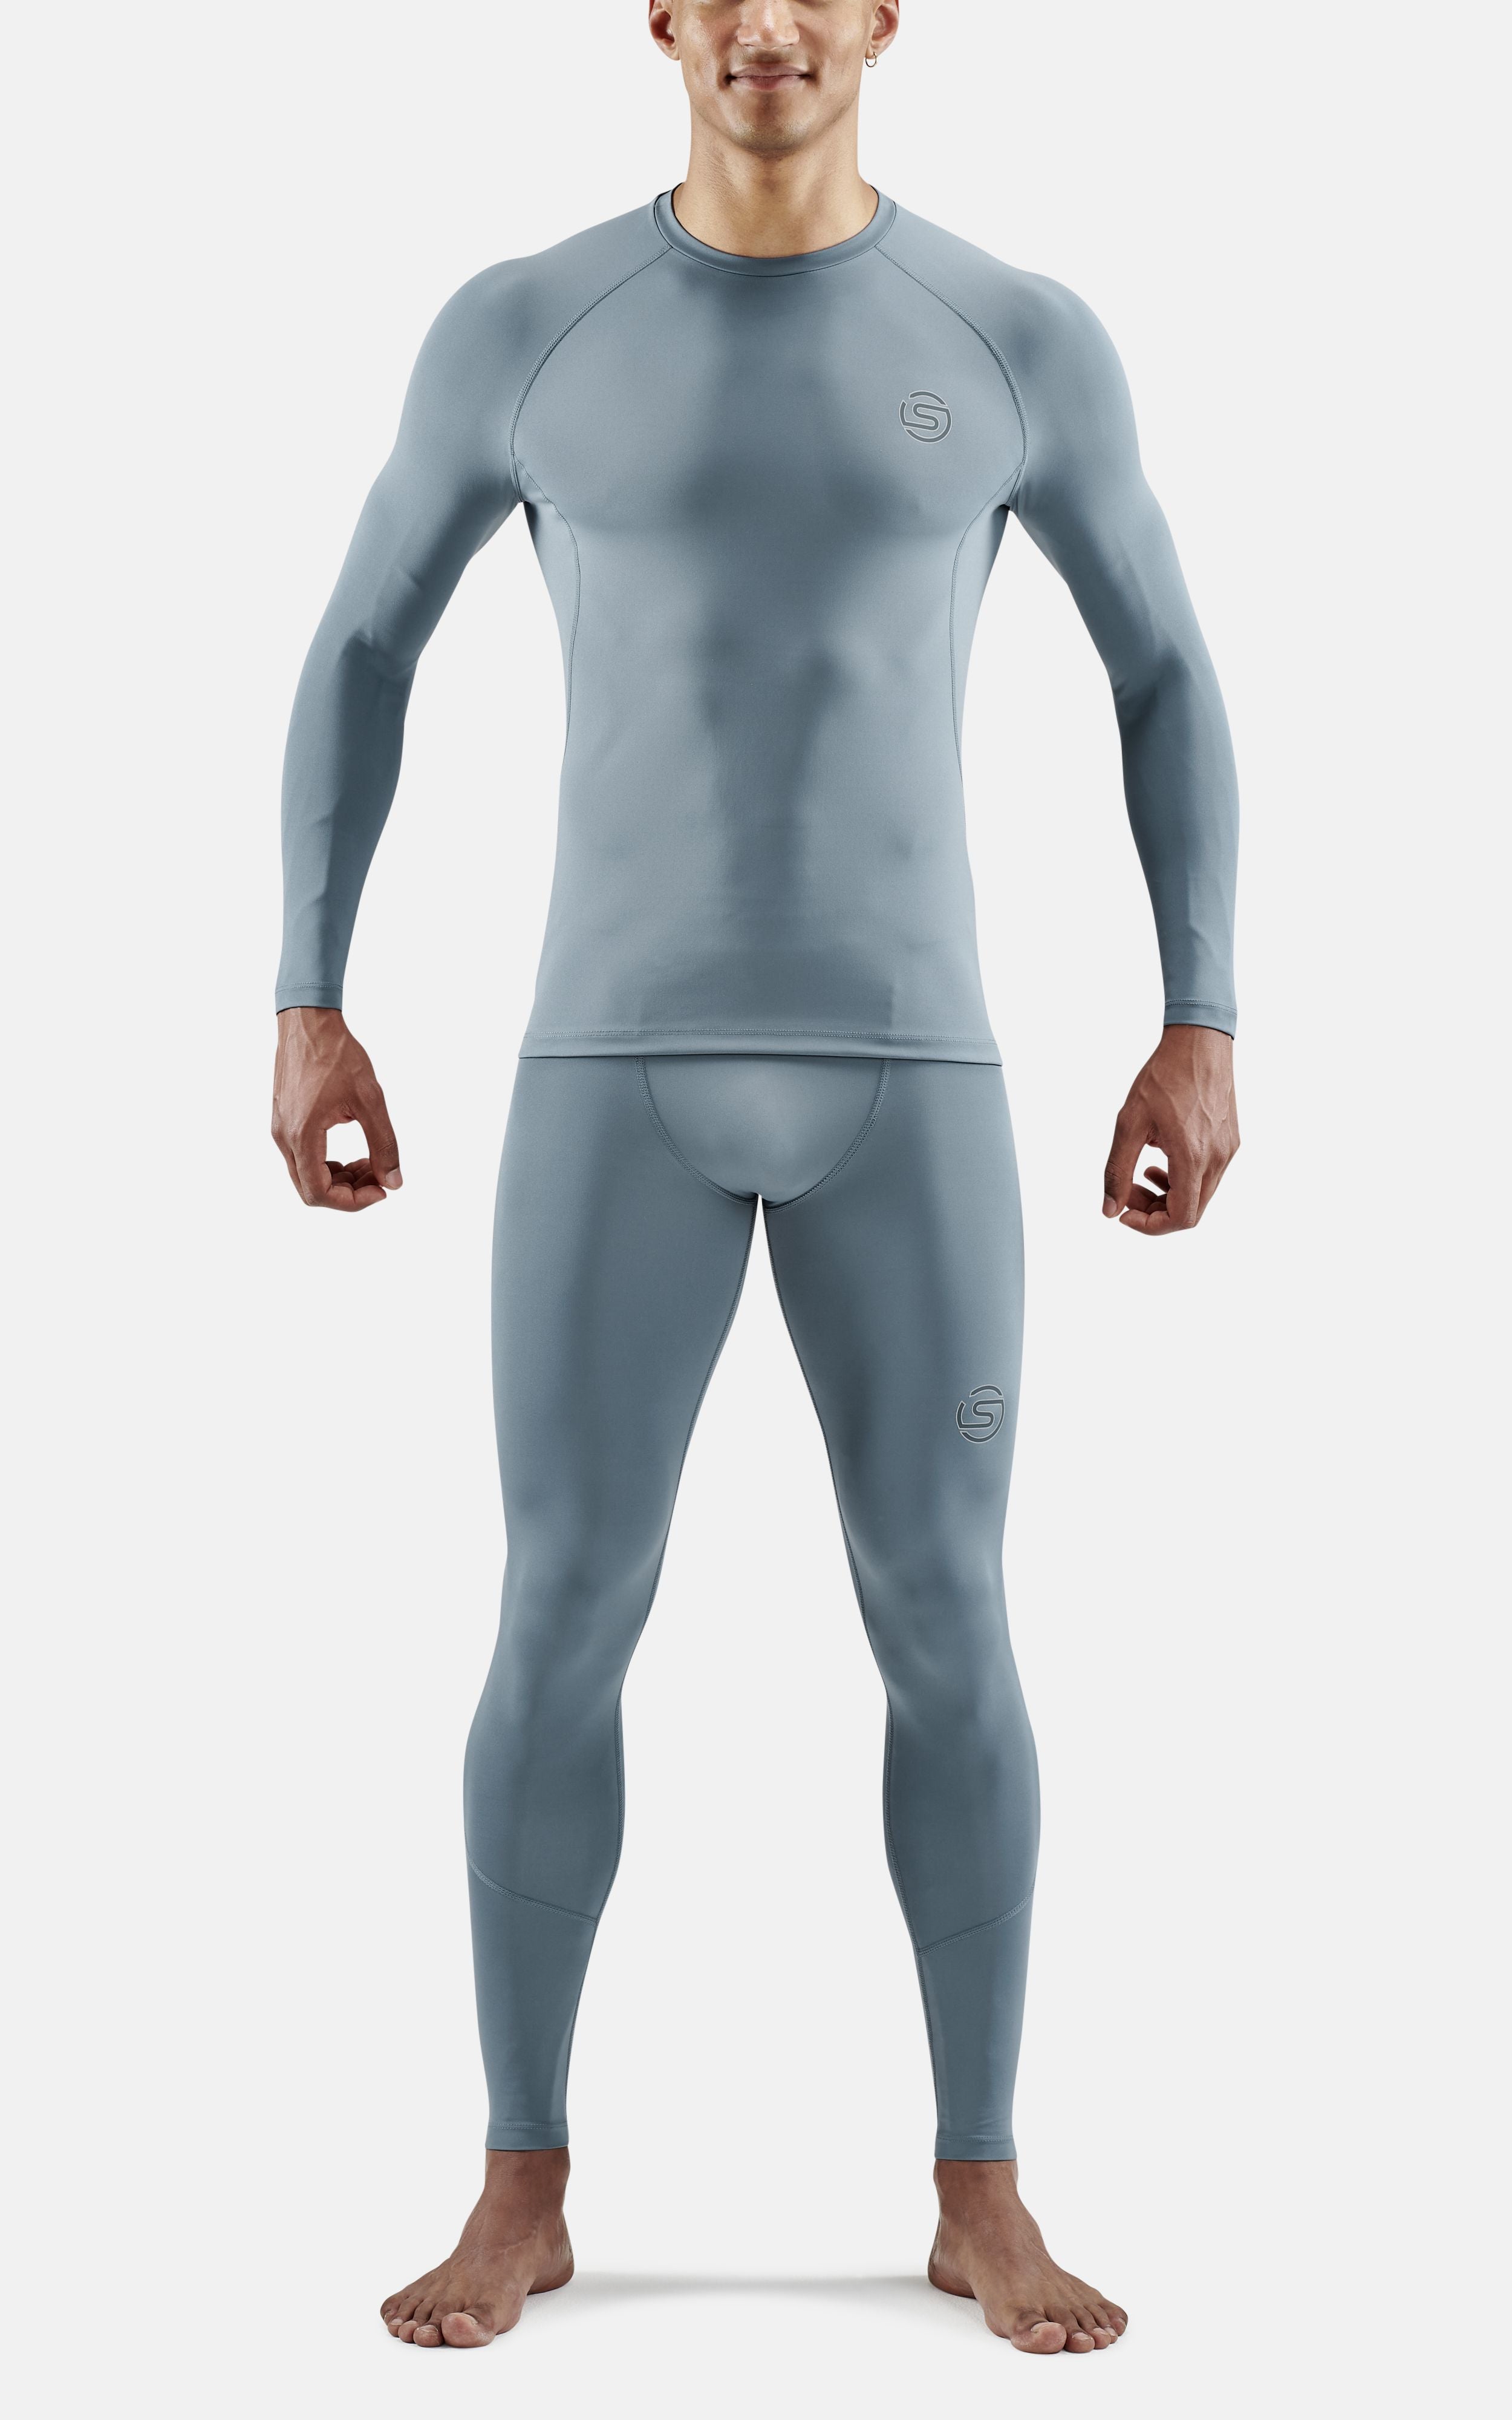 Enhance Your Performance with SKINS™ Compression Gear